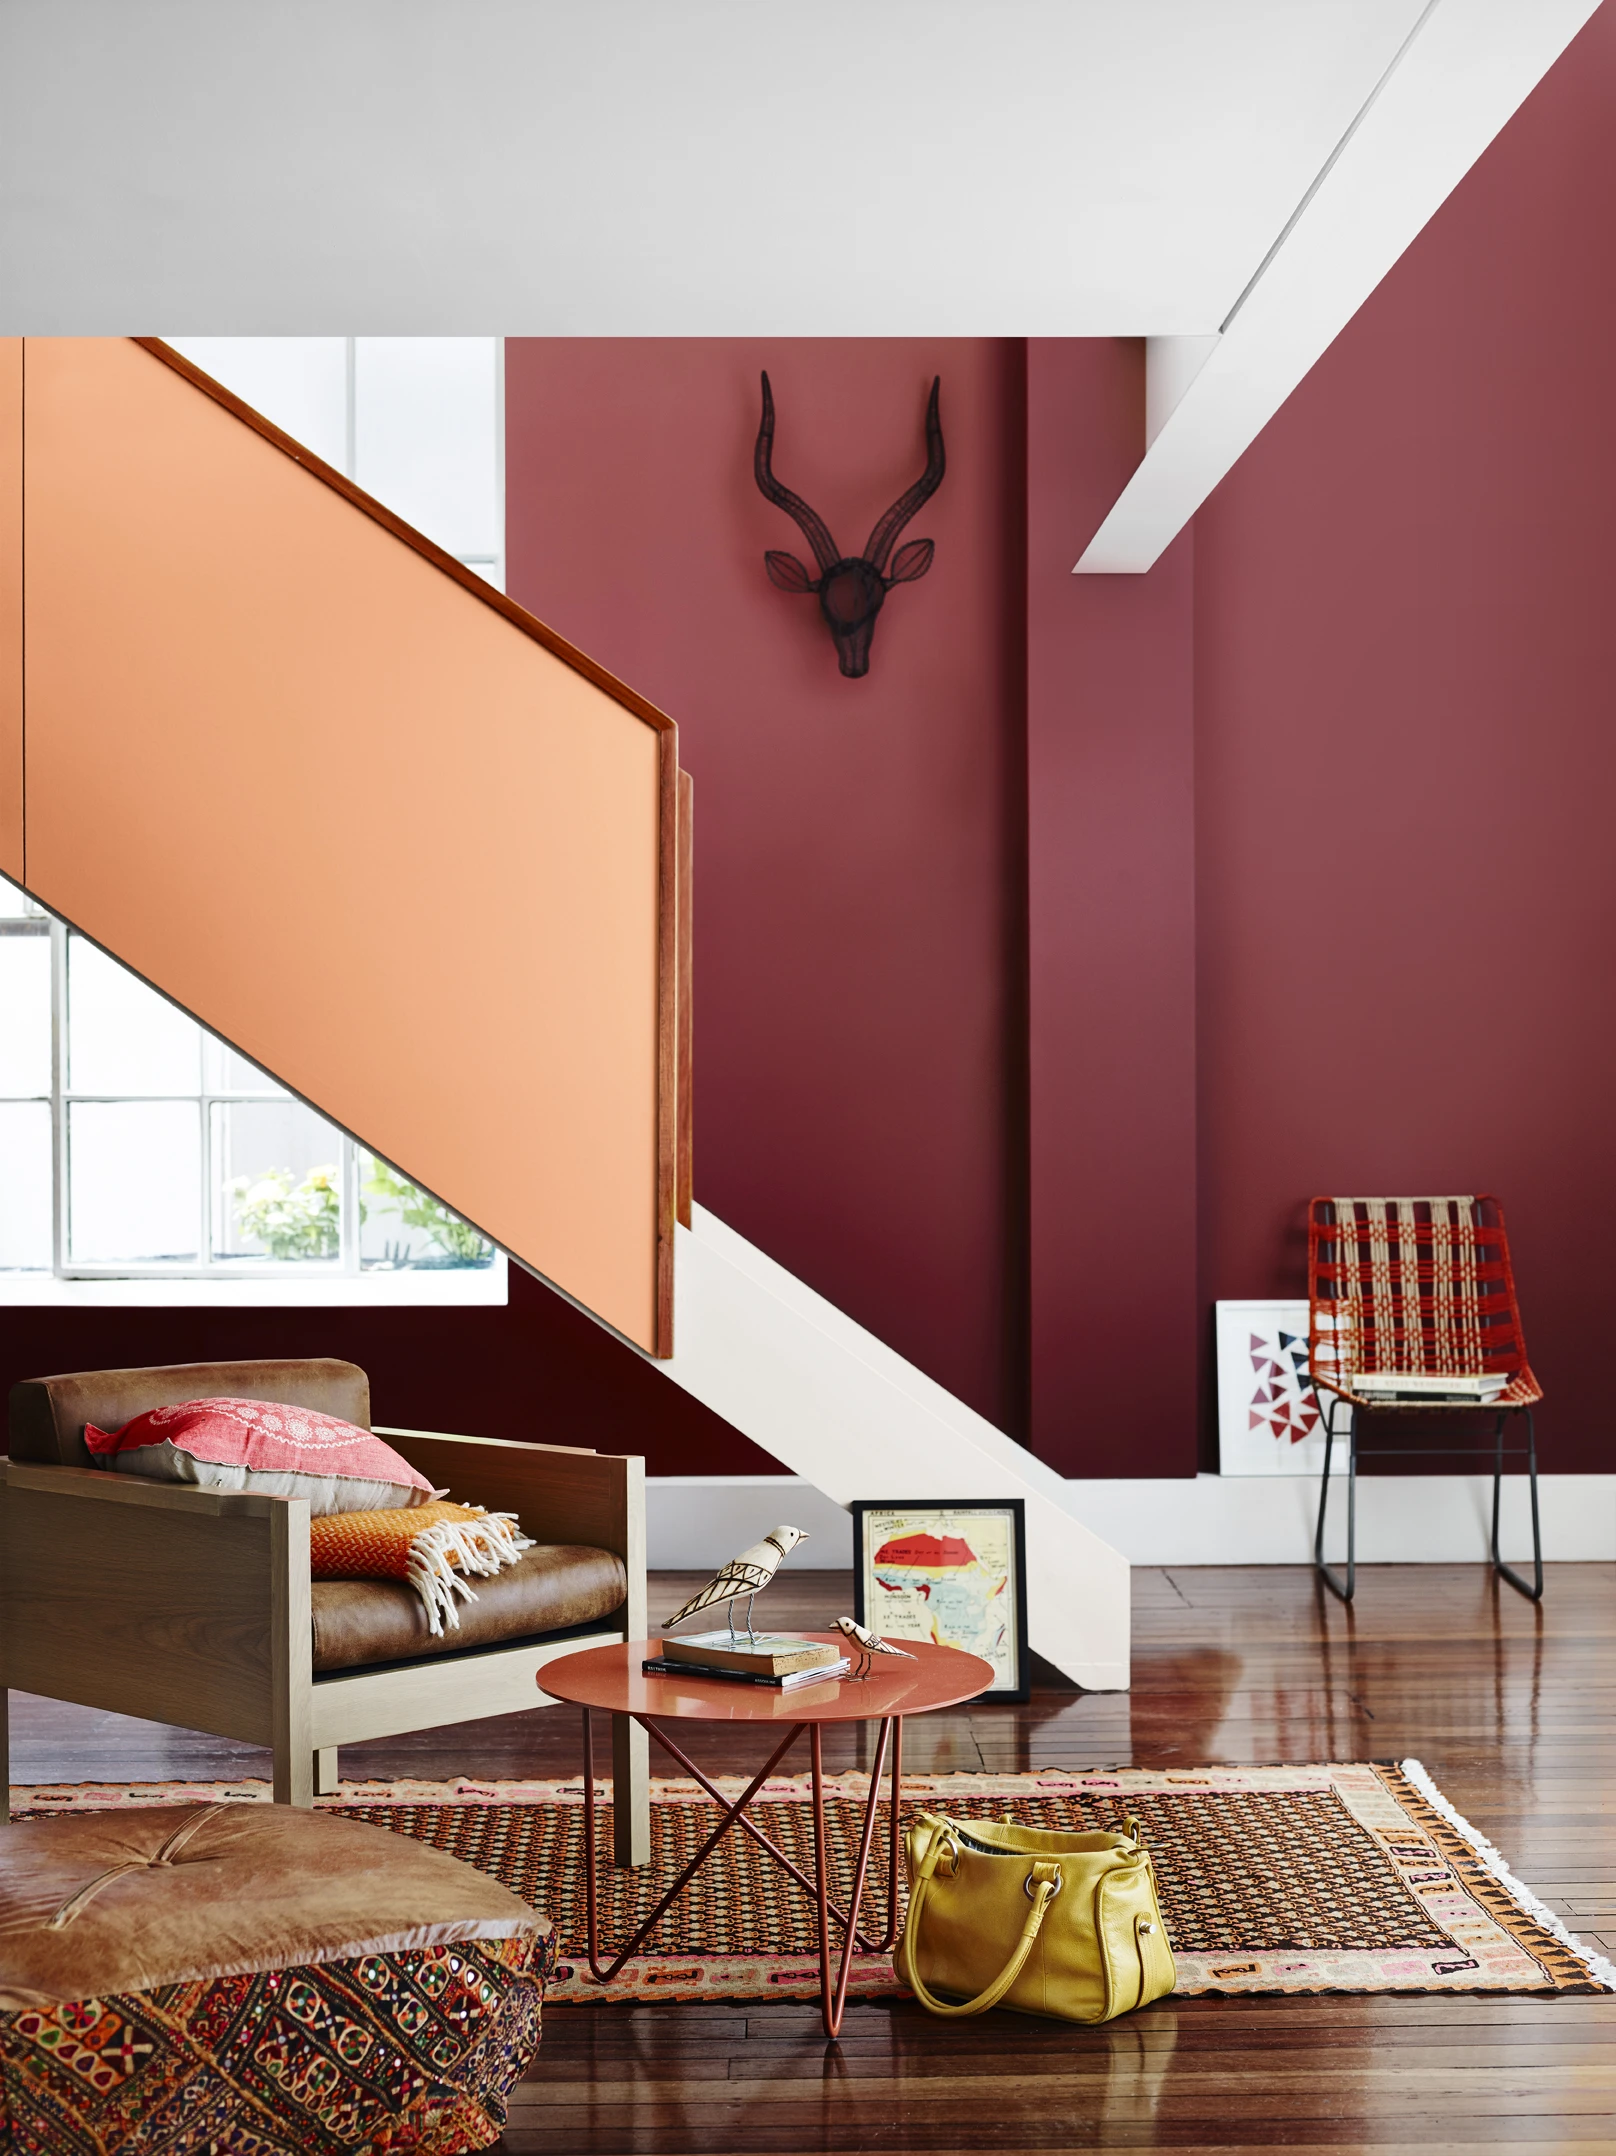 Light orange staircase in living room with deep red walls